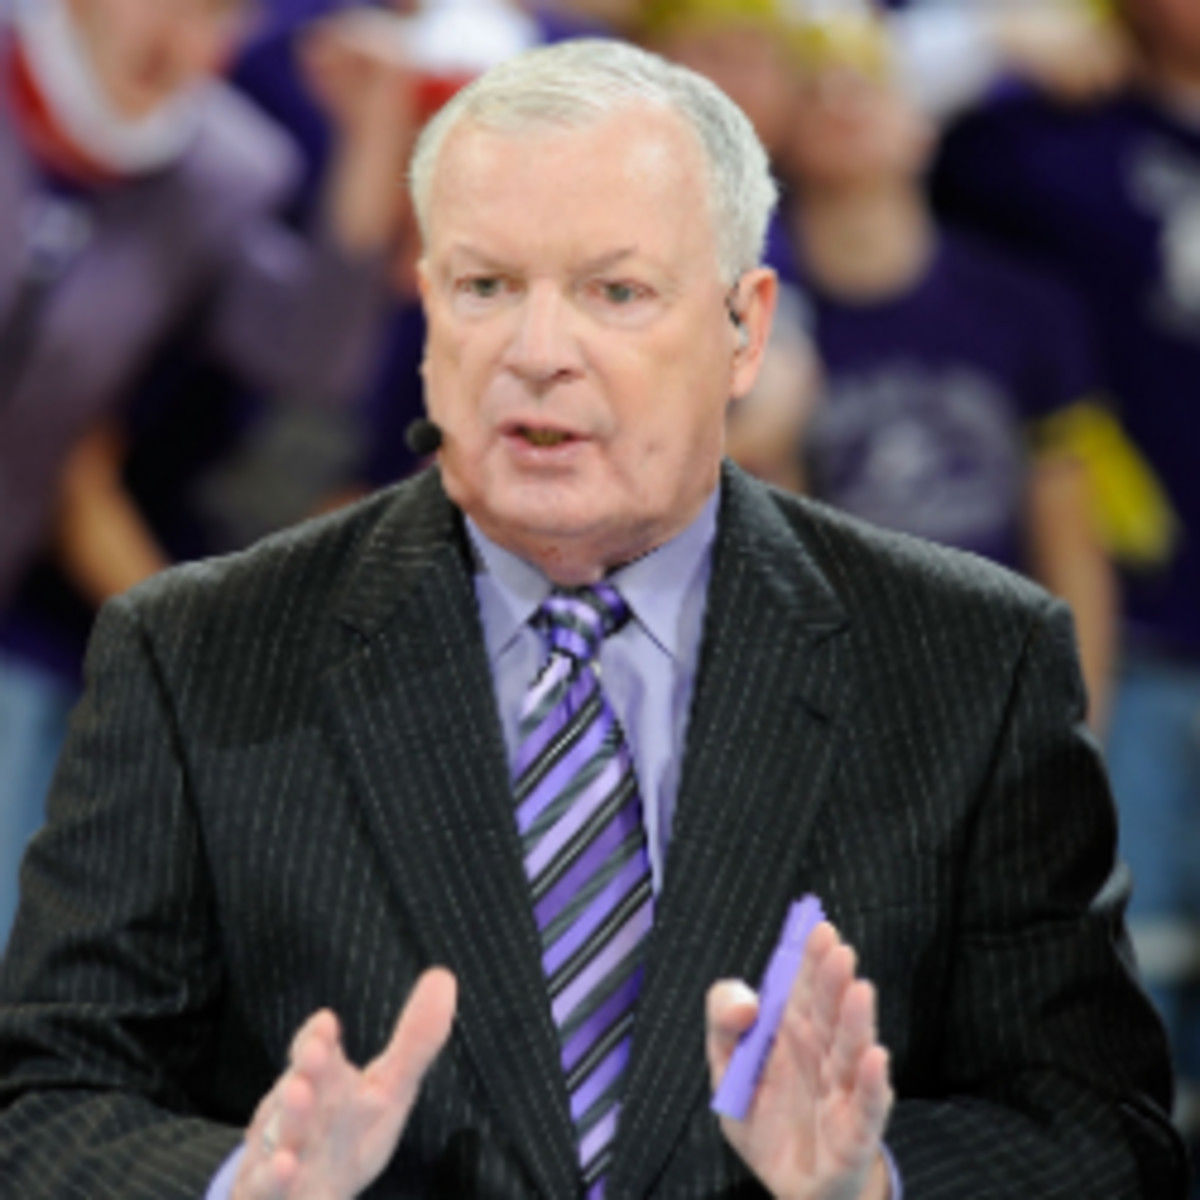 Digger Phelps has been diagnosed with bladder cancer, ESPN said Thursday. (Peter G. Aiken/Getty Images)